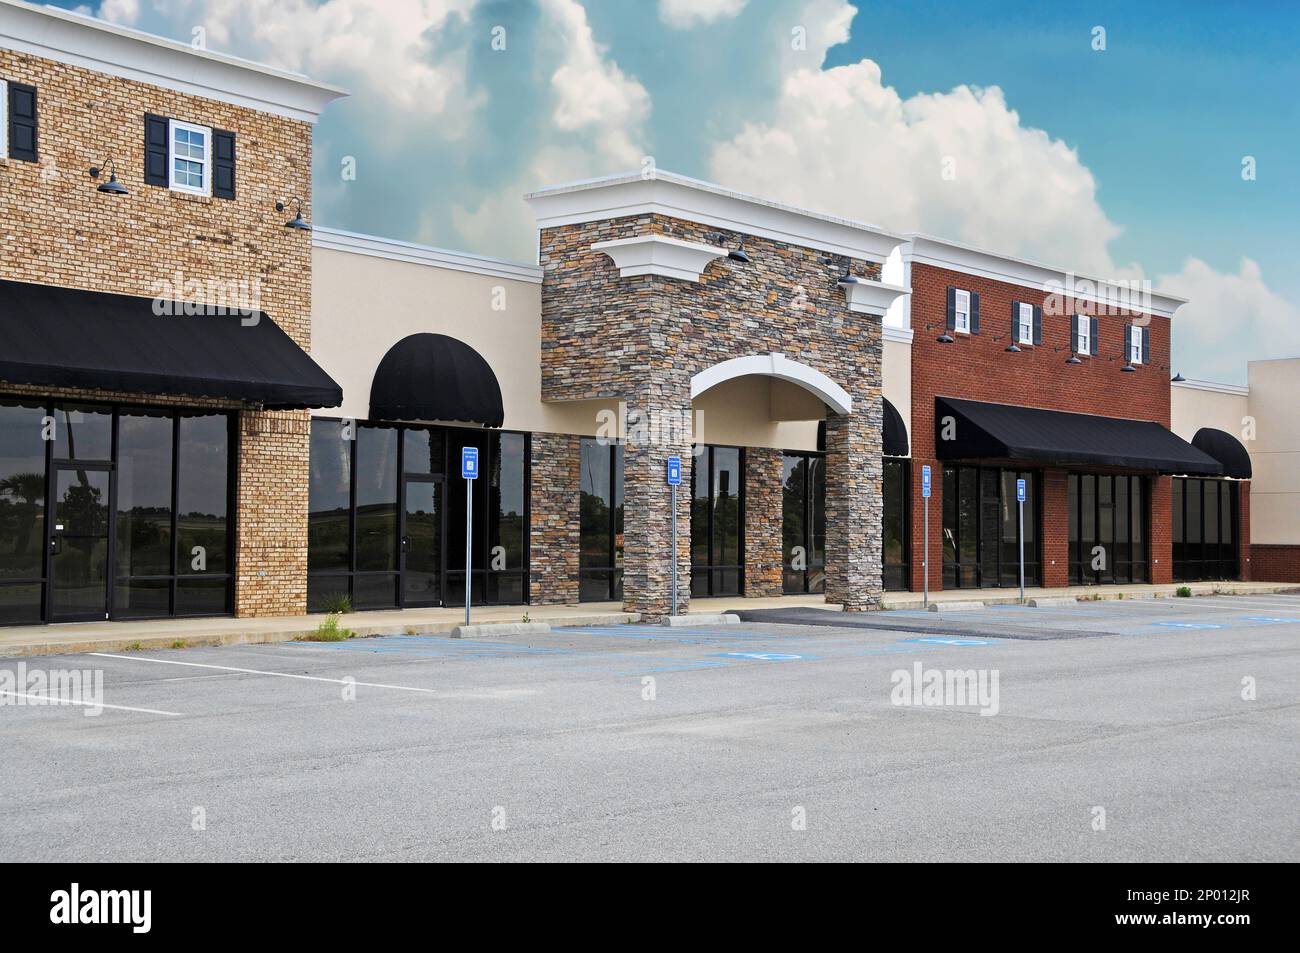 New Commercial, Retail and Office Space available for sale or lease Stock Photo